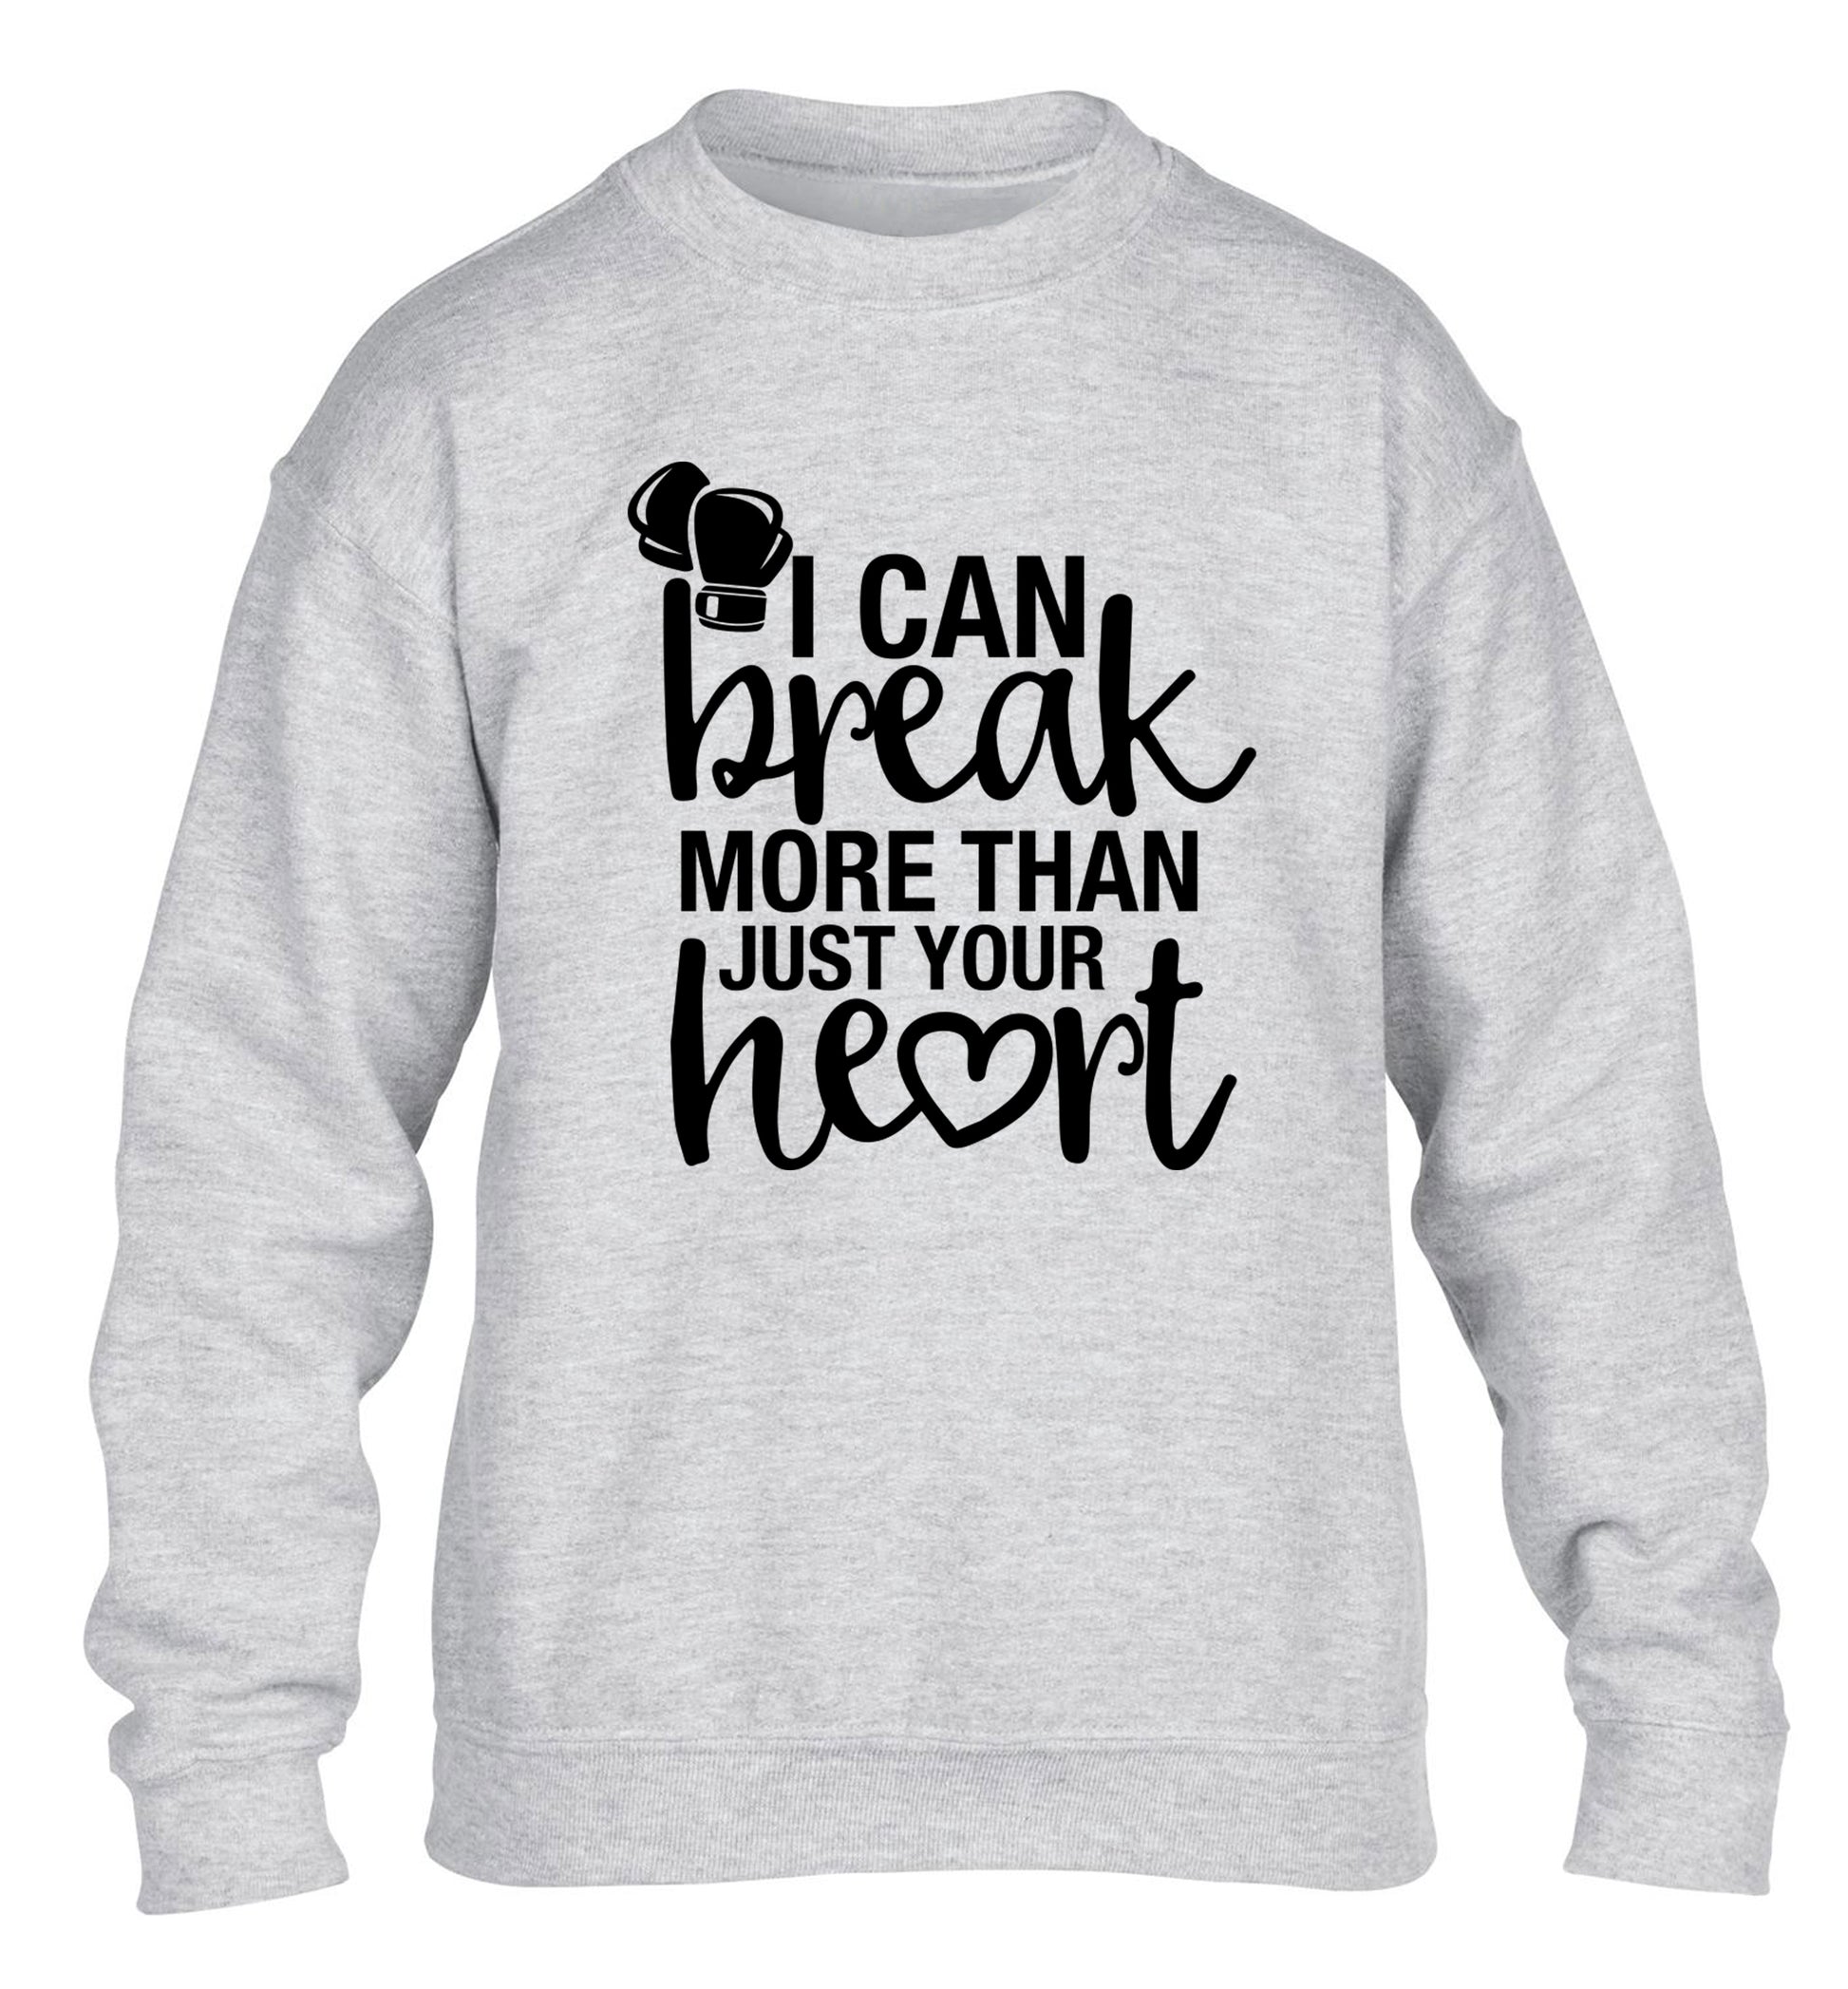 I can break more than just your heart children's grey sweater 12-13 Years